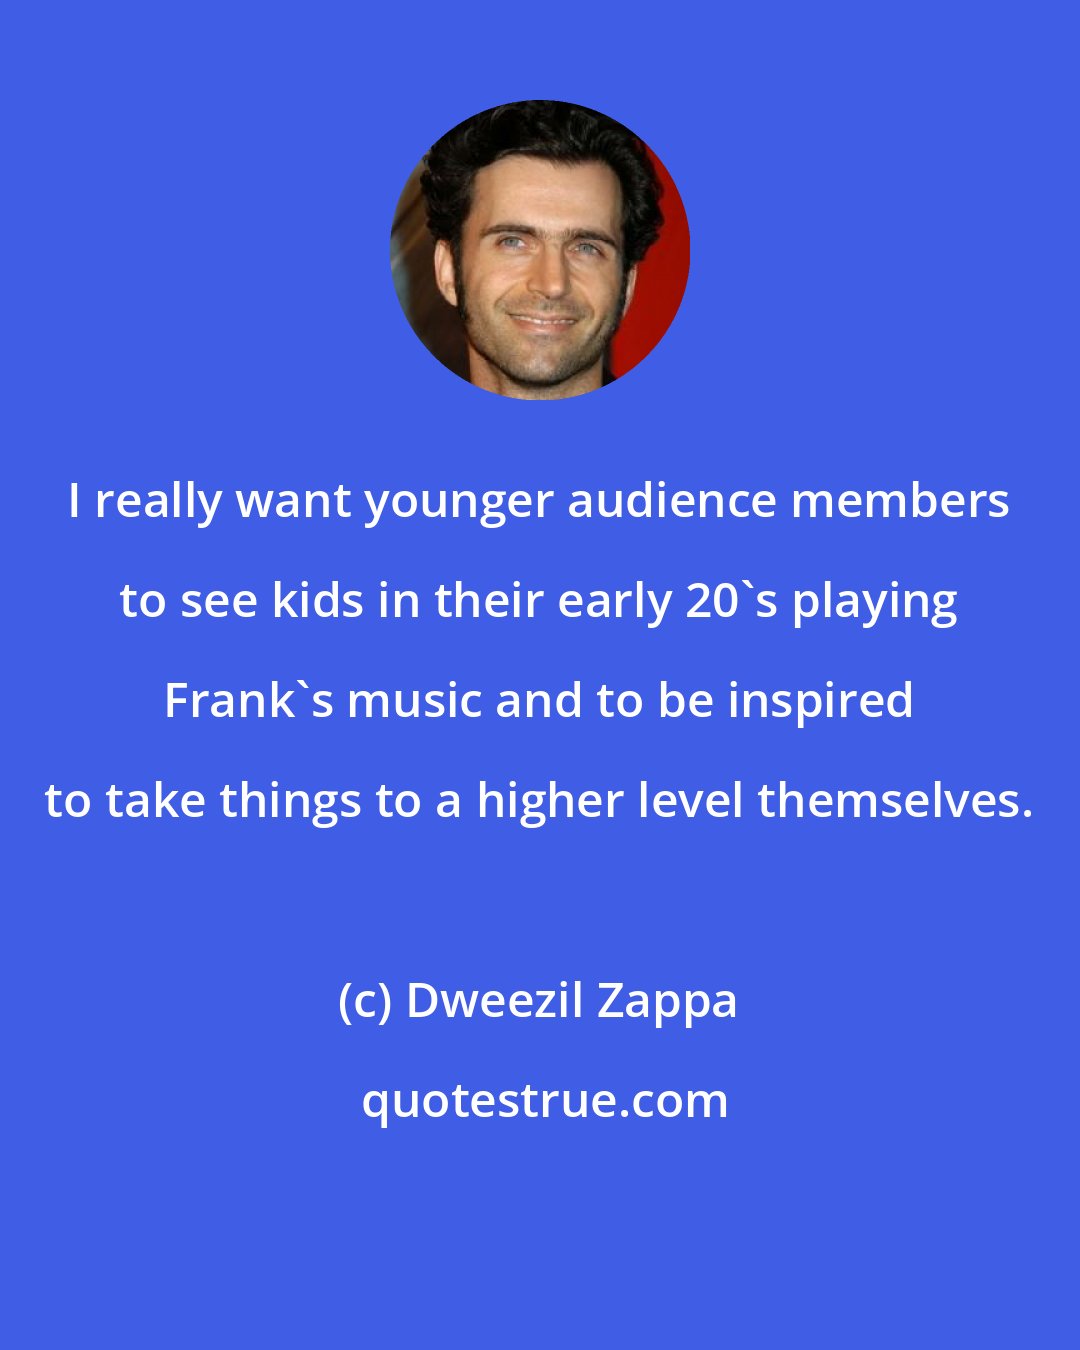 Dweezil Zappa: I really want younger audience members to see kids in their early 20's playing Frank's music and to be inspired to take things to a higher level themselves.